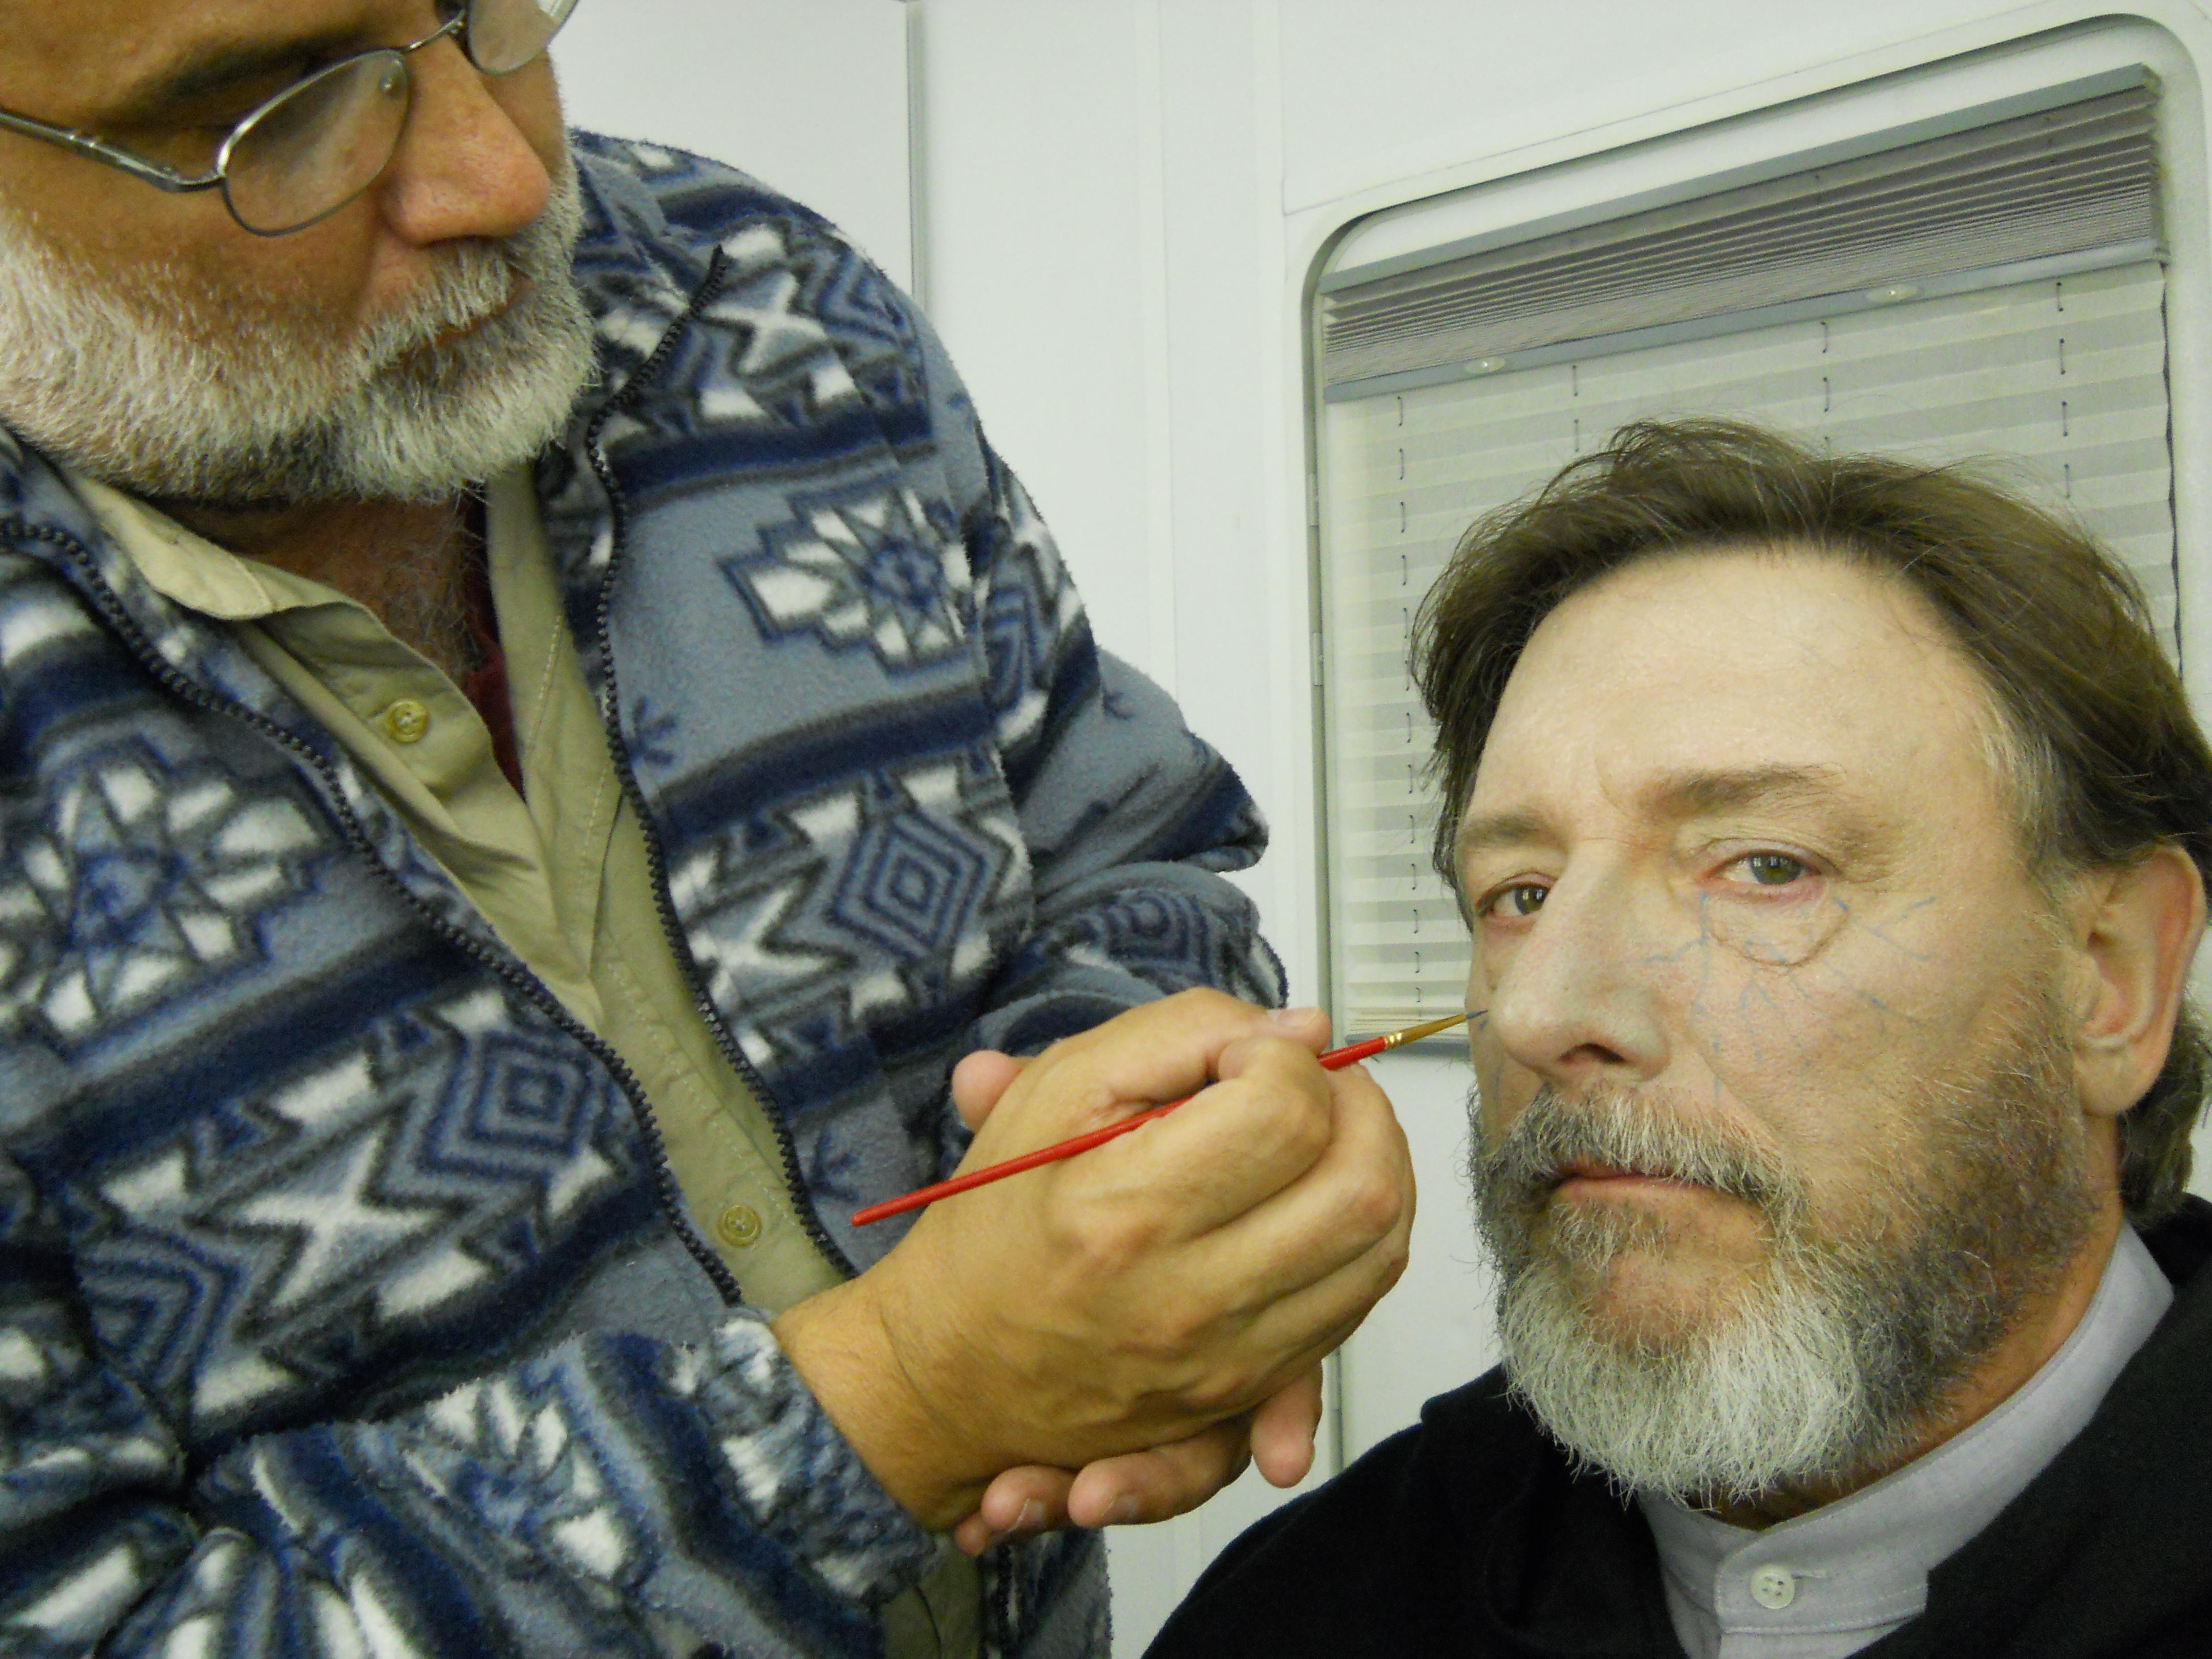 Makeup Artist Jeff Goodwin preps me for the film climax.